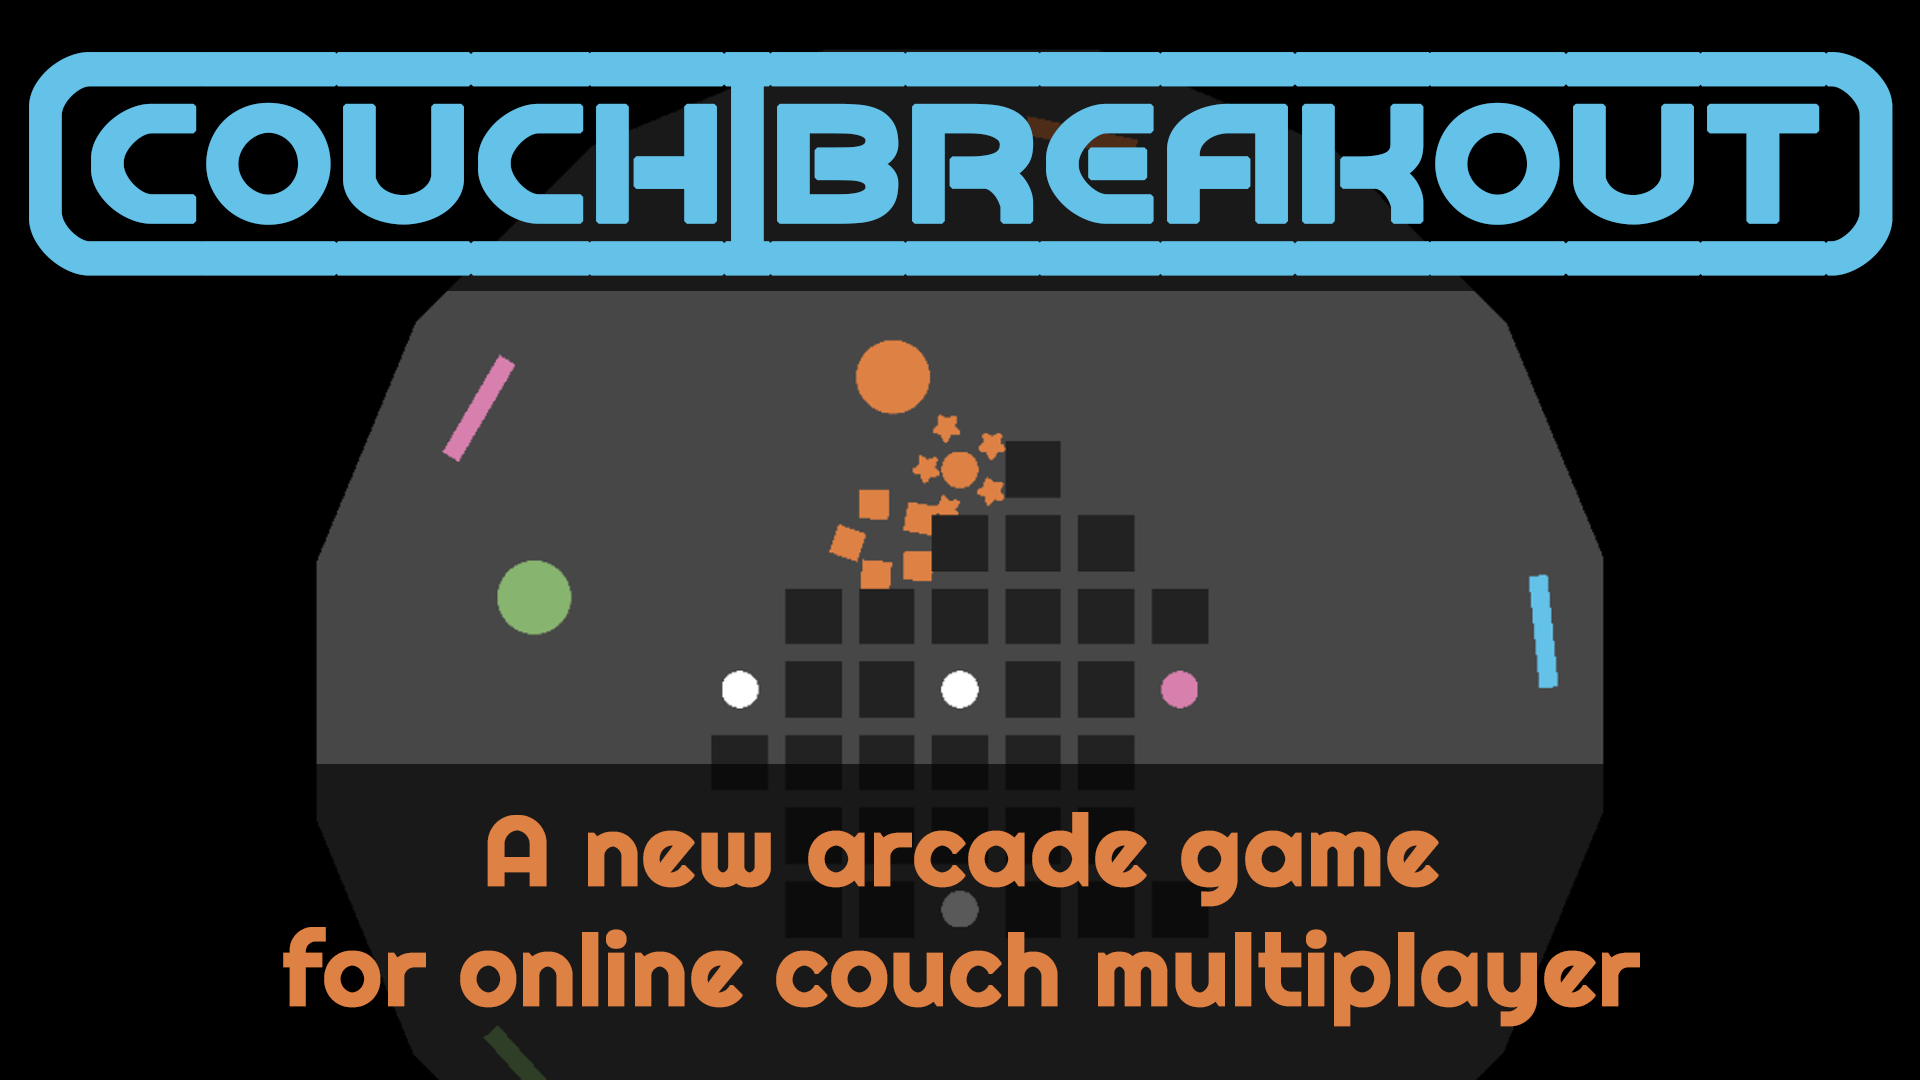 Couch breakout mac os x